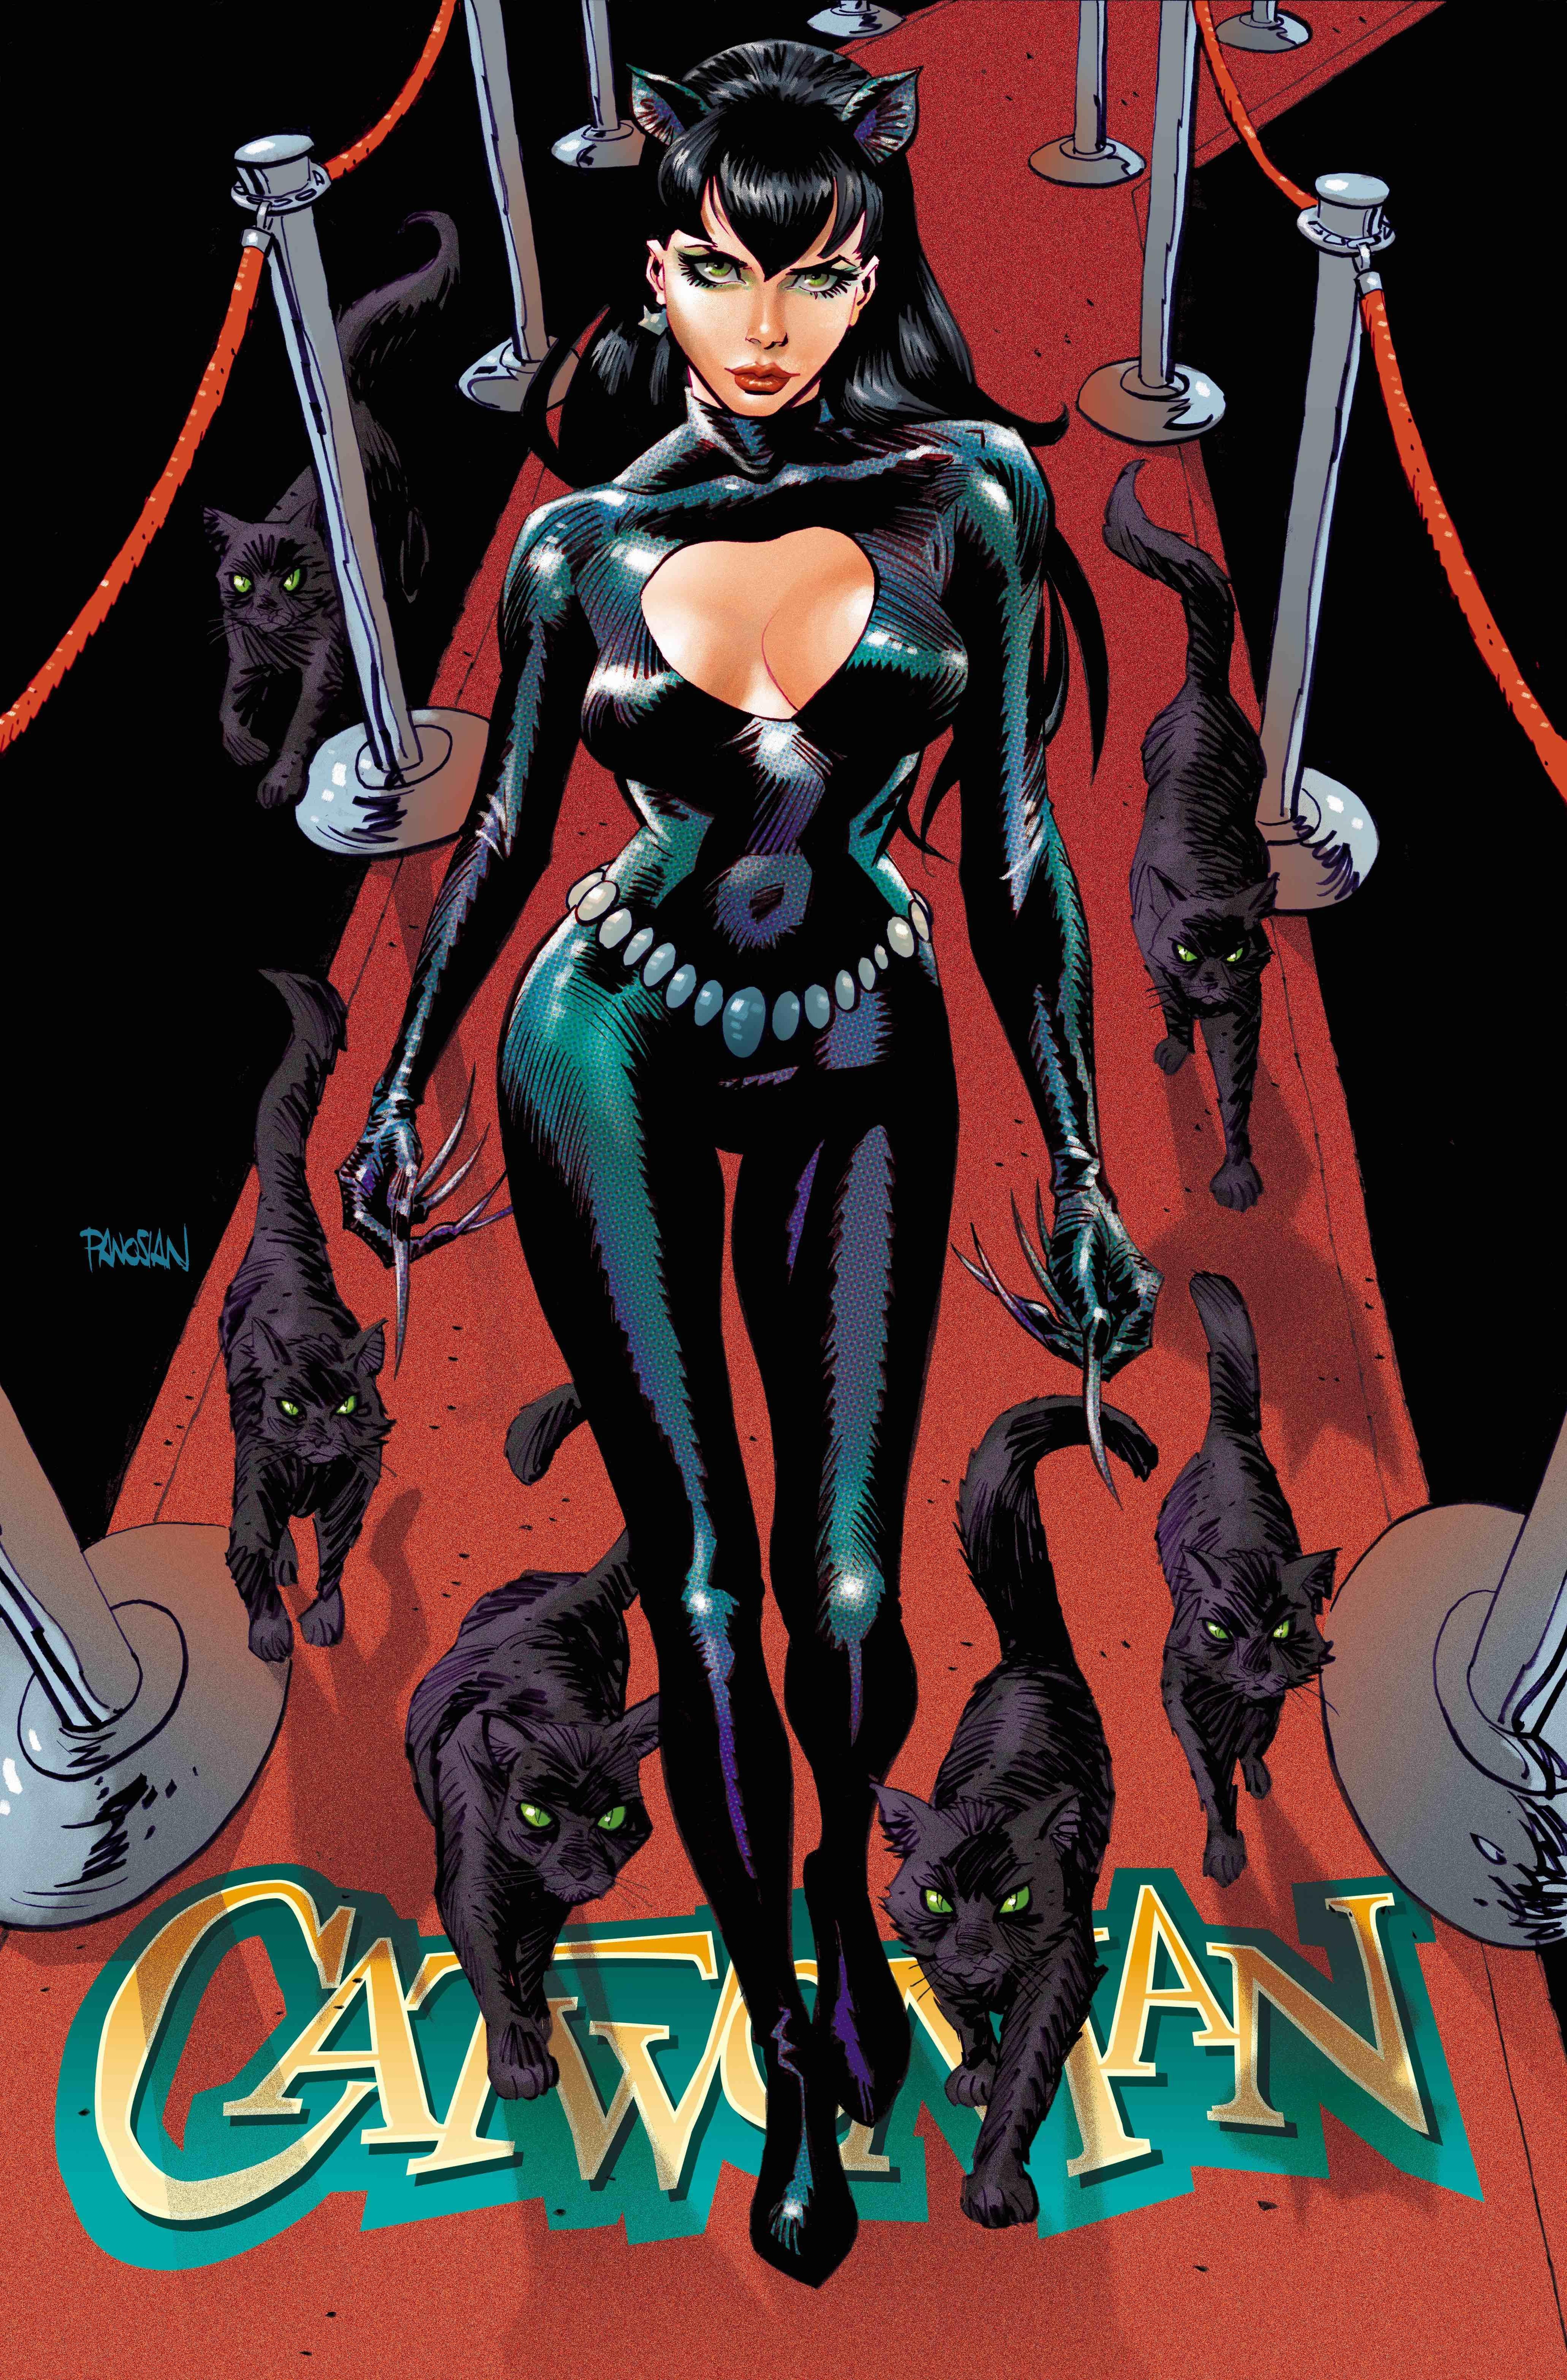 tales-from-earth-6-a-celebration-of-stan-lee-1-catwoman-open-to-order-variant-panosian.jpg